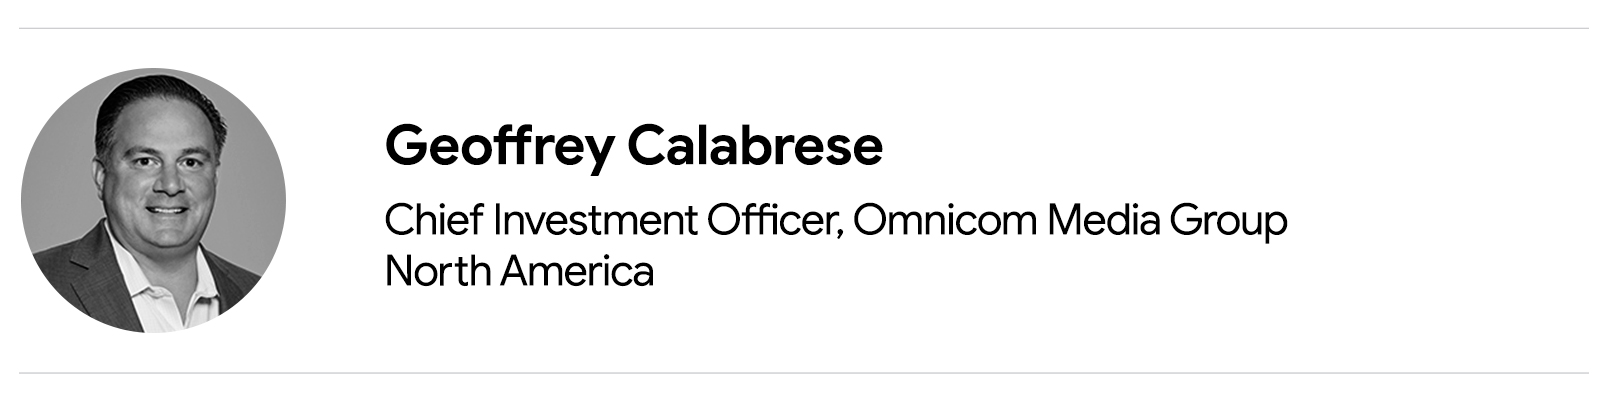 A black and white photograph of Geoffrey Calabrese, Chief Investment Officer, Omnicom Media Group North America, a white man with short dark hair, who is wearing a dark jacket and white, collared shirt.